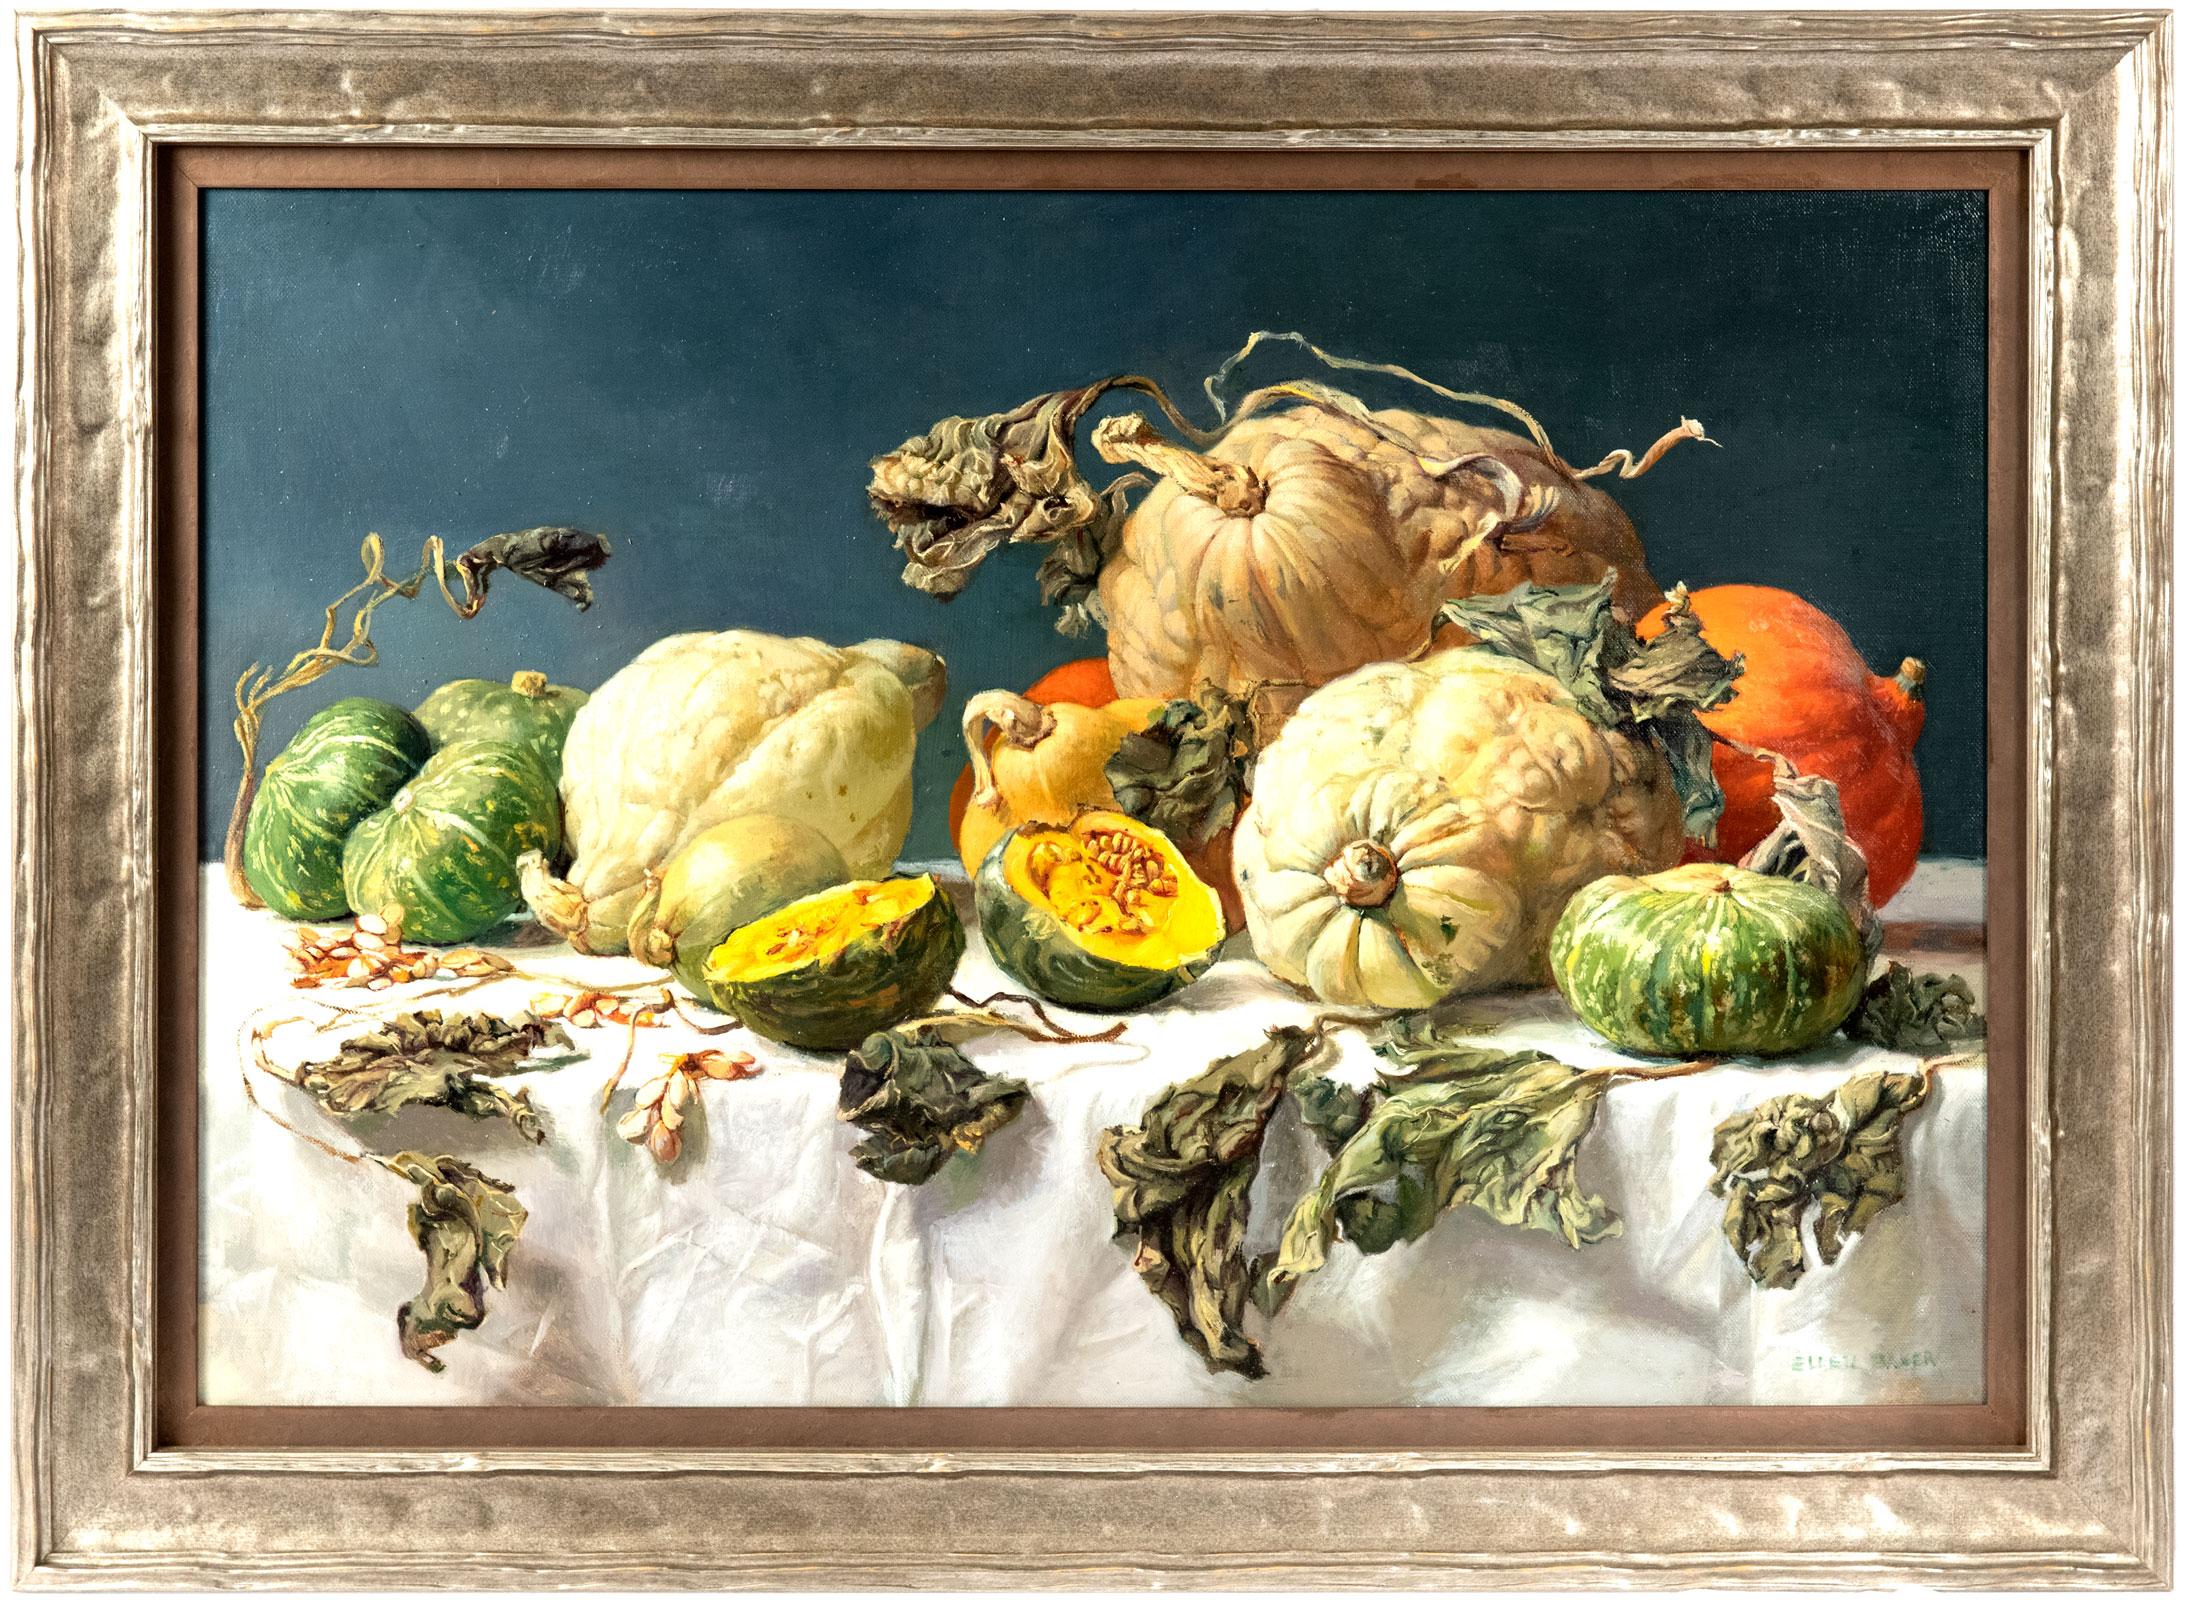 Painting in isolation for decades, Ellen Baker has been carefully honing her skills through daily meticulous paintings of ordinary objects and seasonal produce that are pulled from her own garden. Baker works in the tradition of seventeenth-century